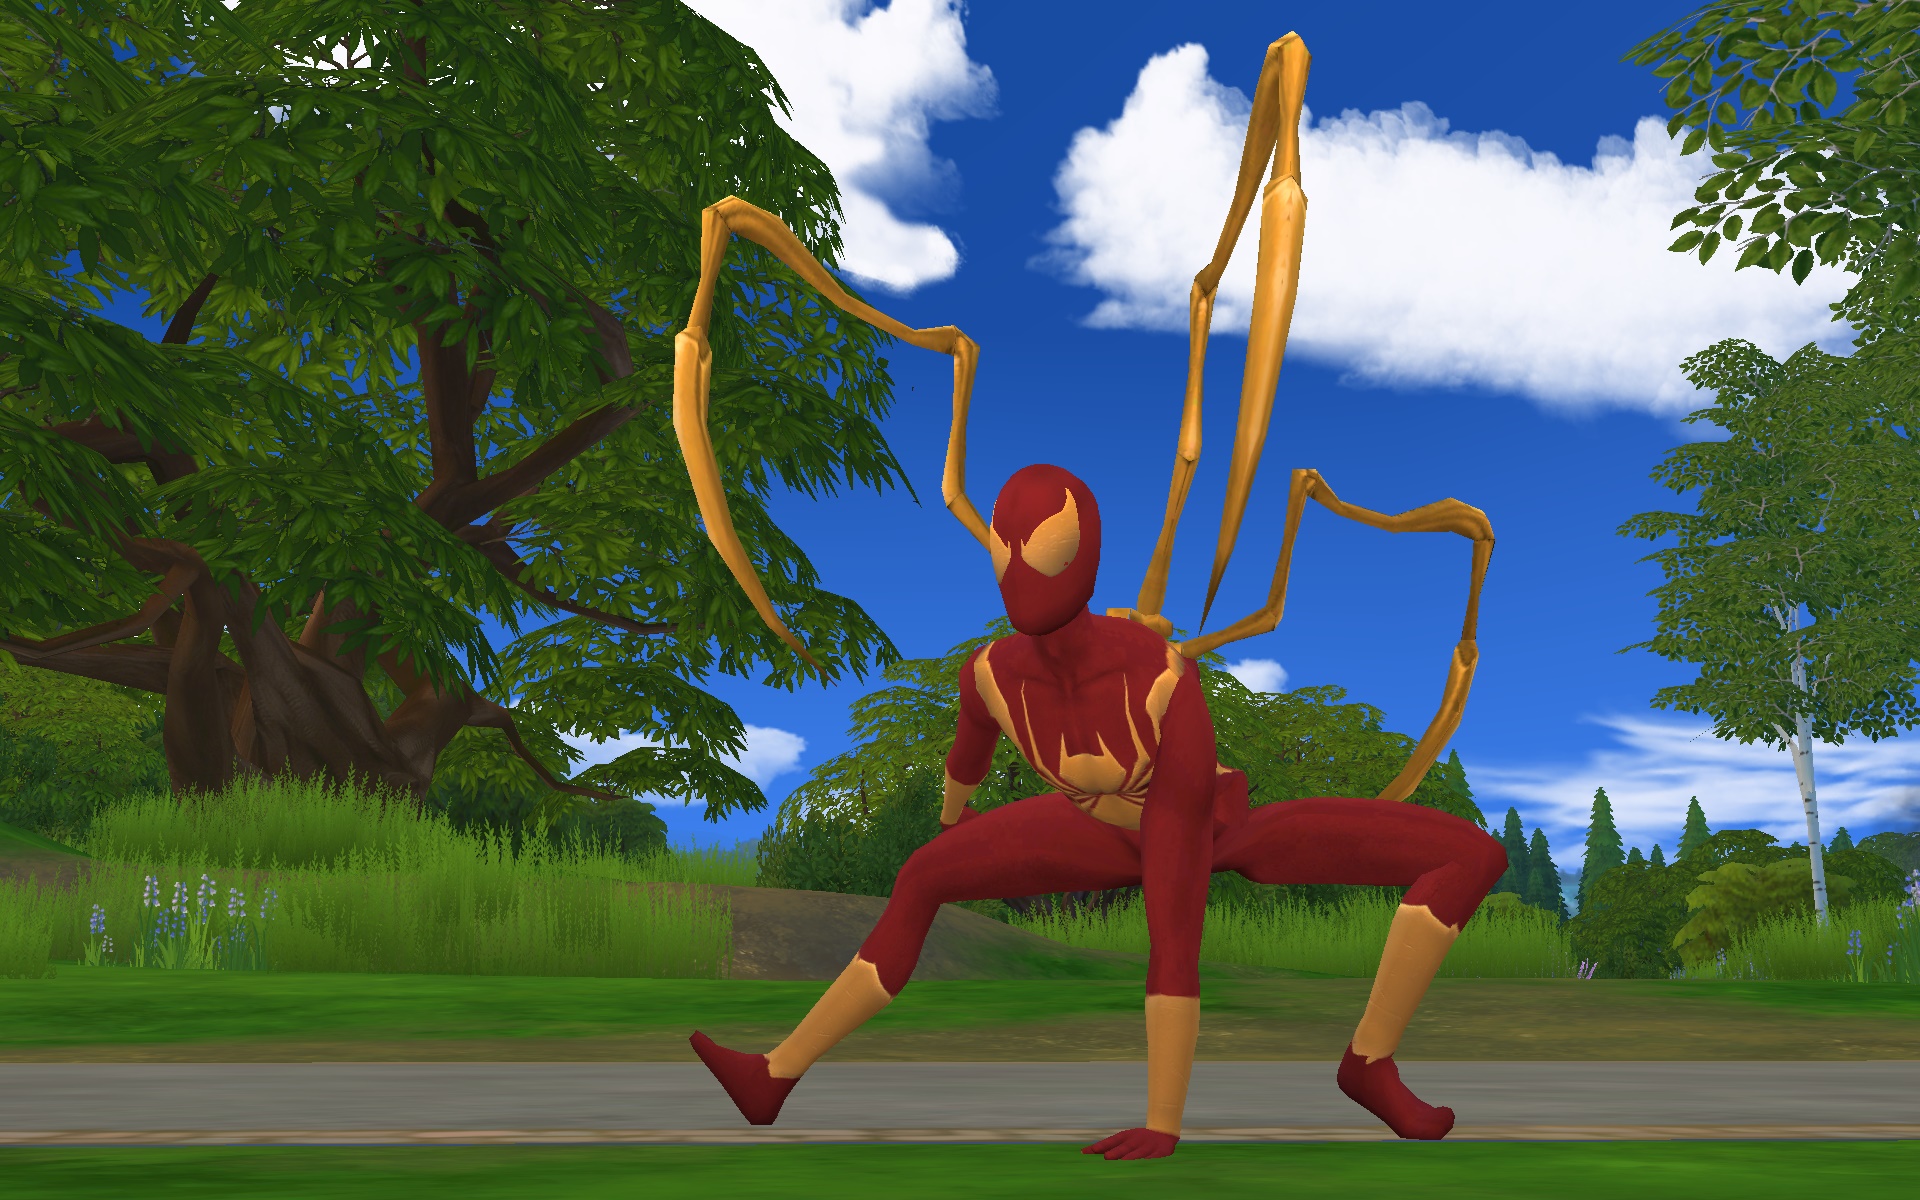 Gallery of Sims 4 Spider Arms Cc.